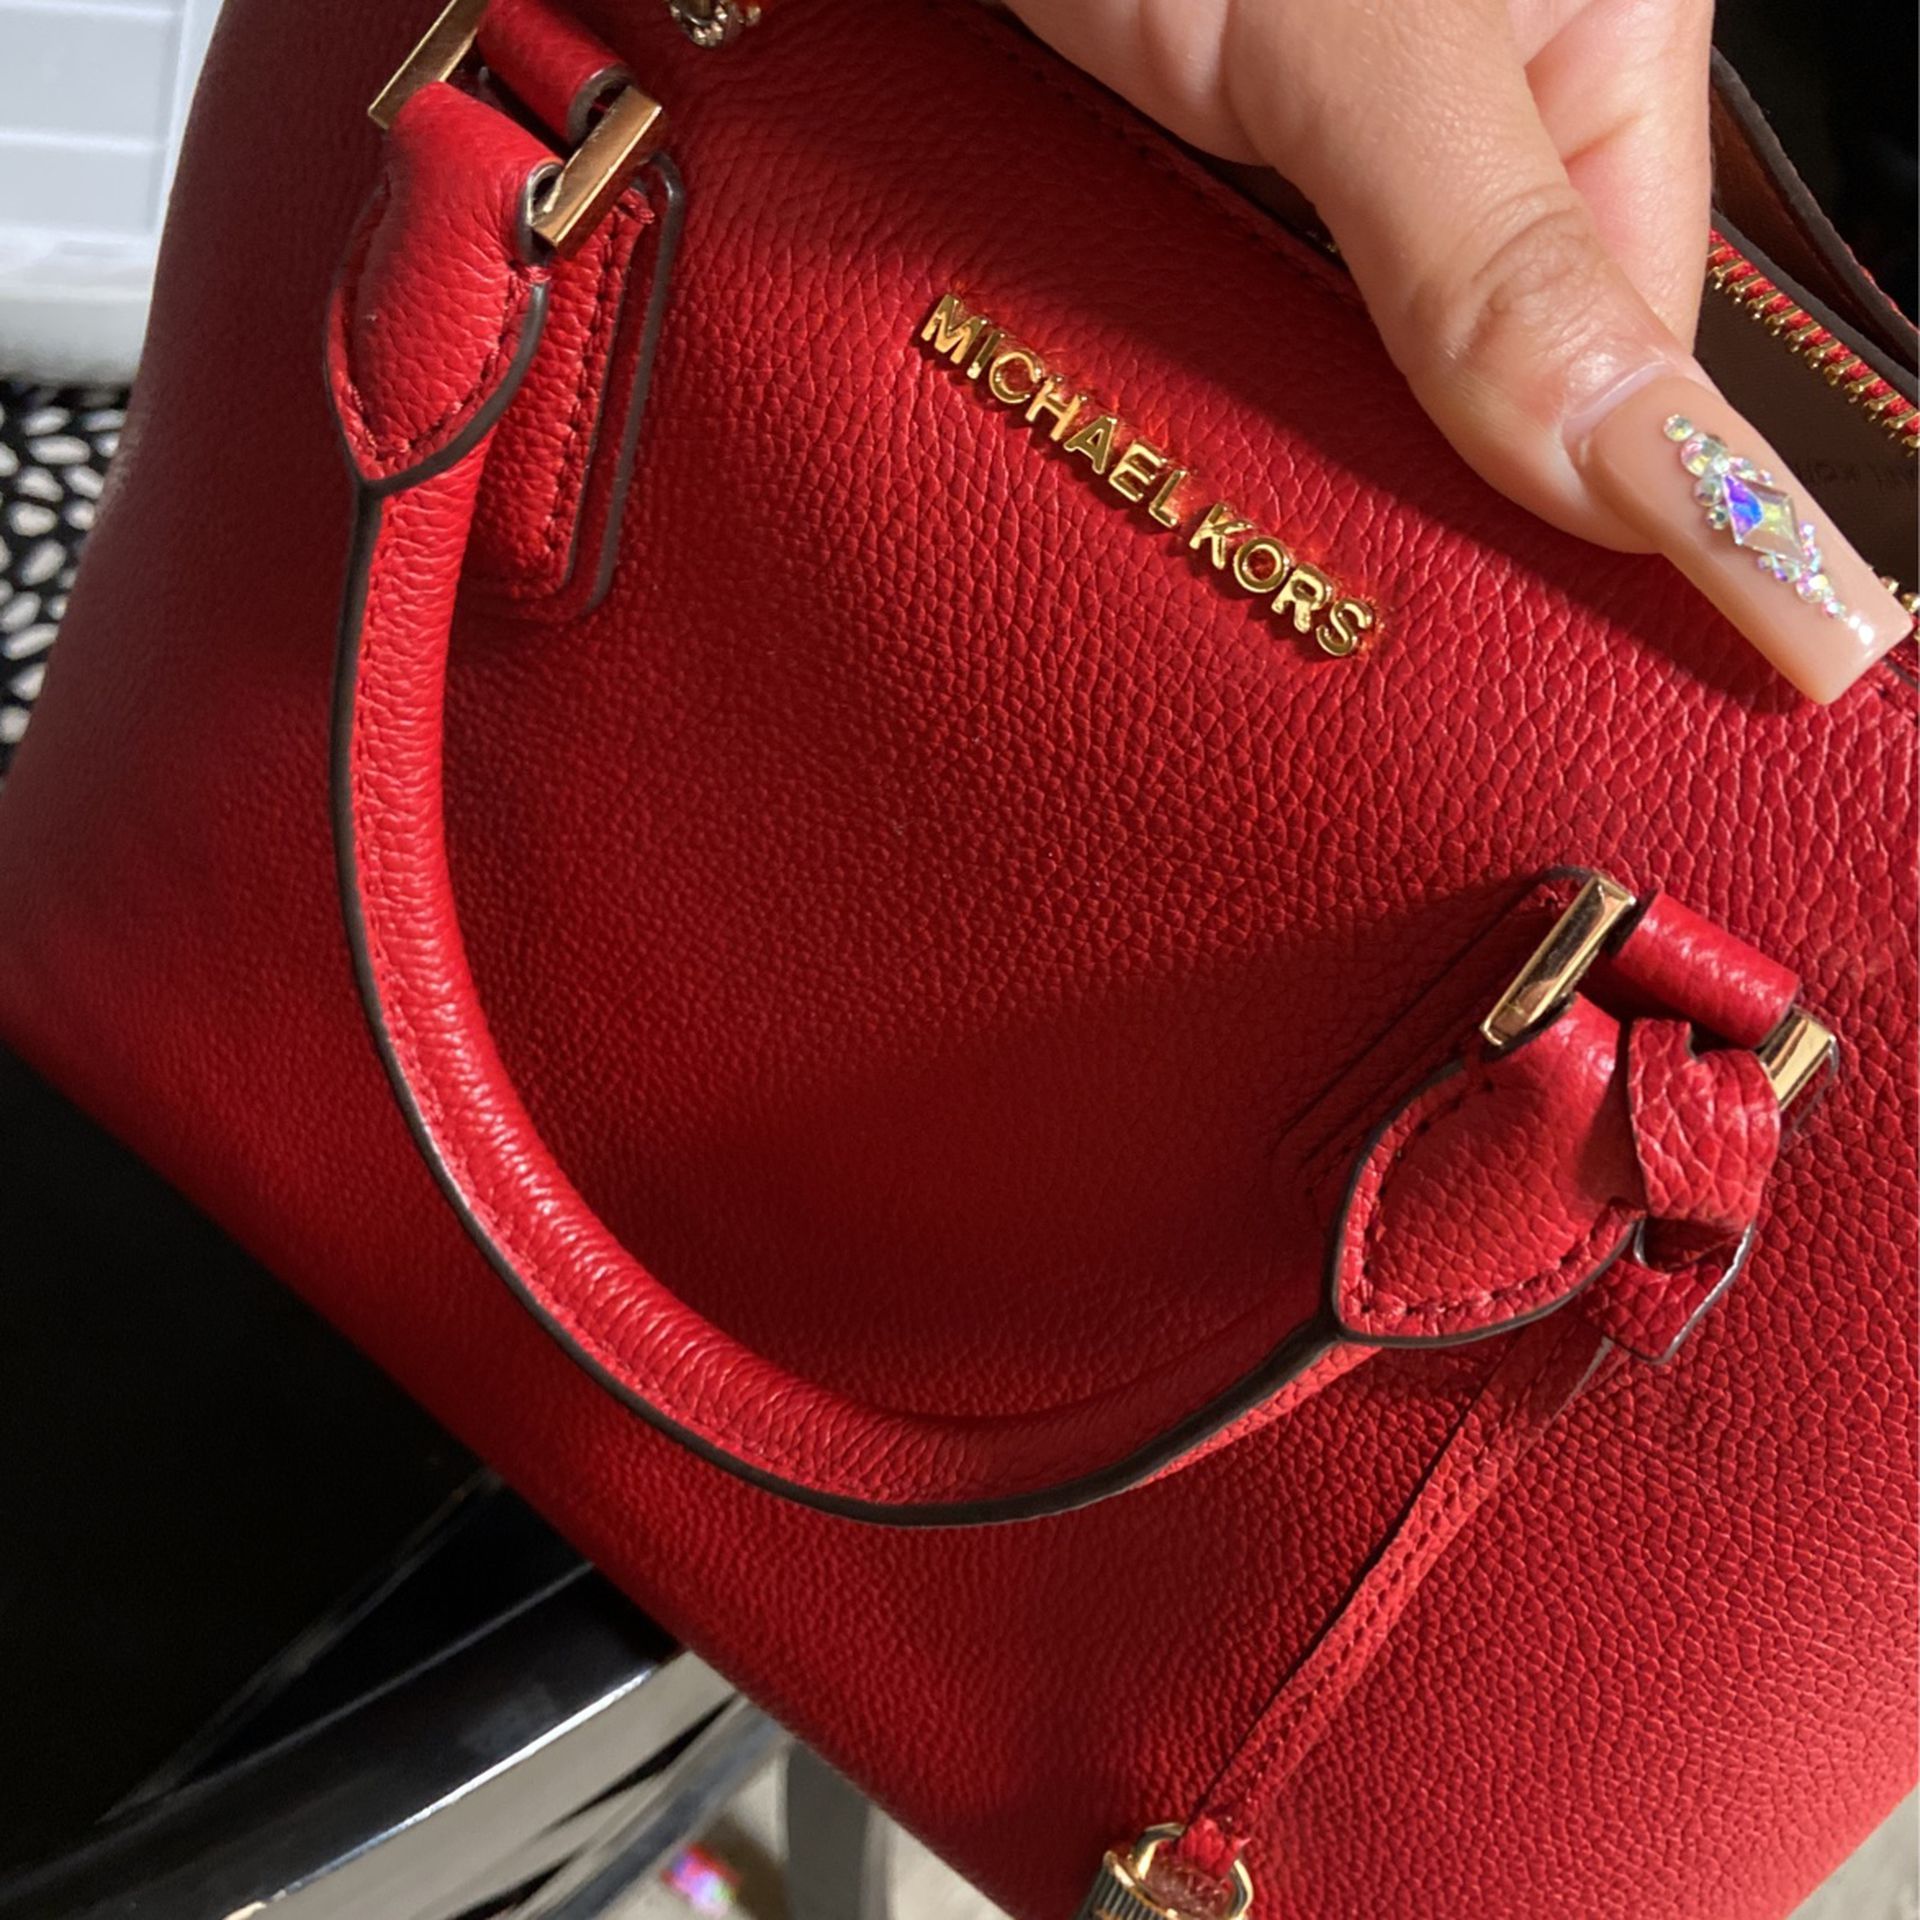 Michael Kors Purse for Sale in Fresno, CA - OfferUp